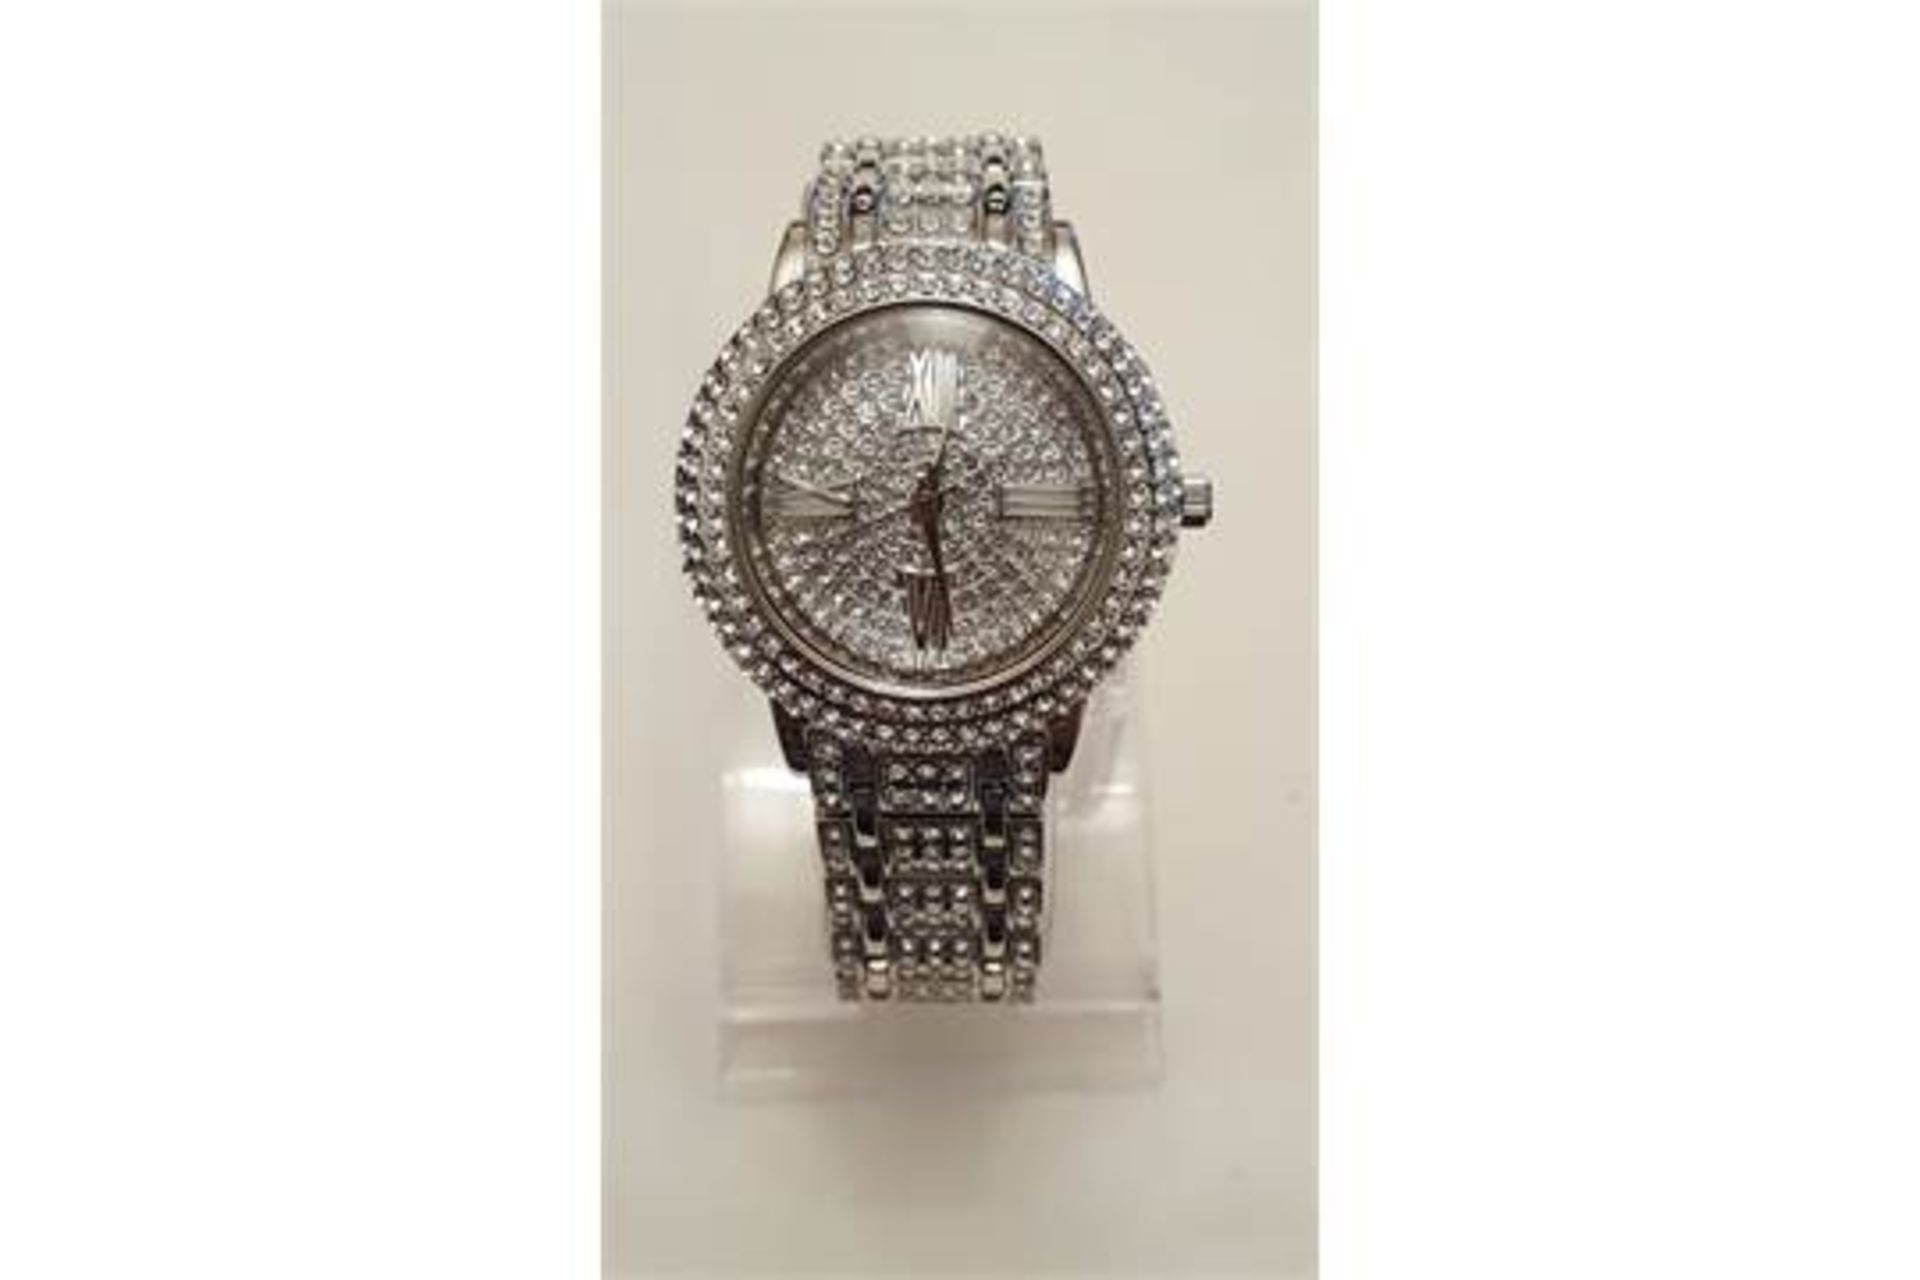 BRAND NEW LADIES SILVER ROUND FACE DIAMANTE WATCH BY SOFTECH, QL1194,WITH 1 YEAR WARRANTY